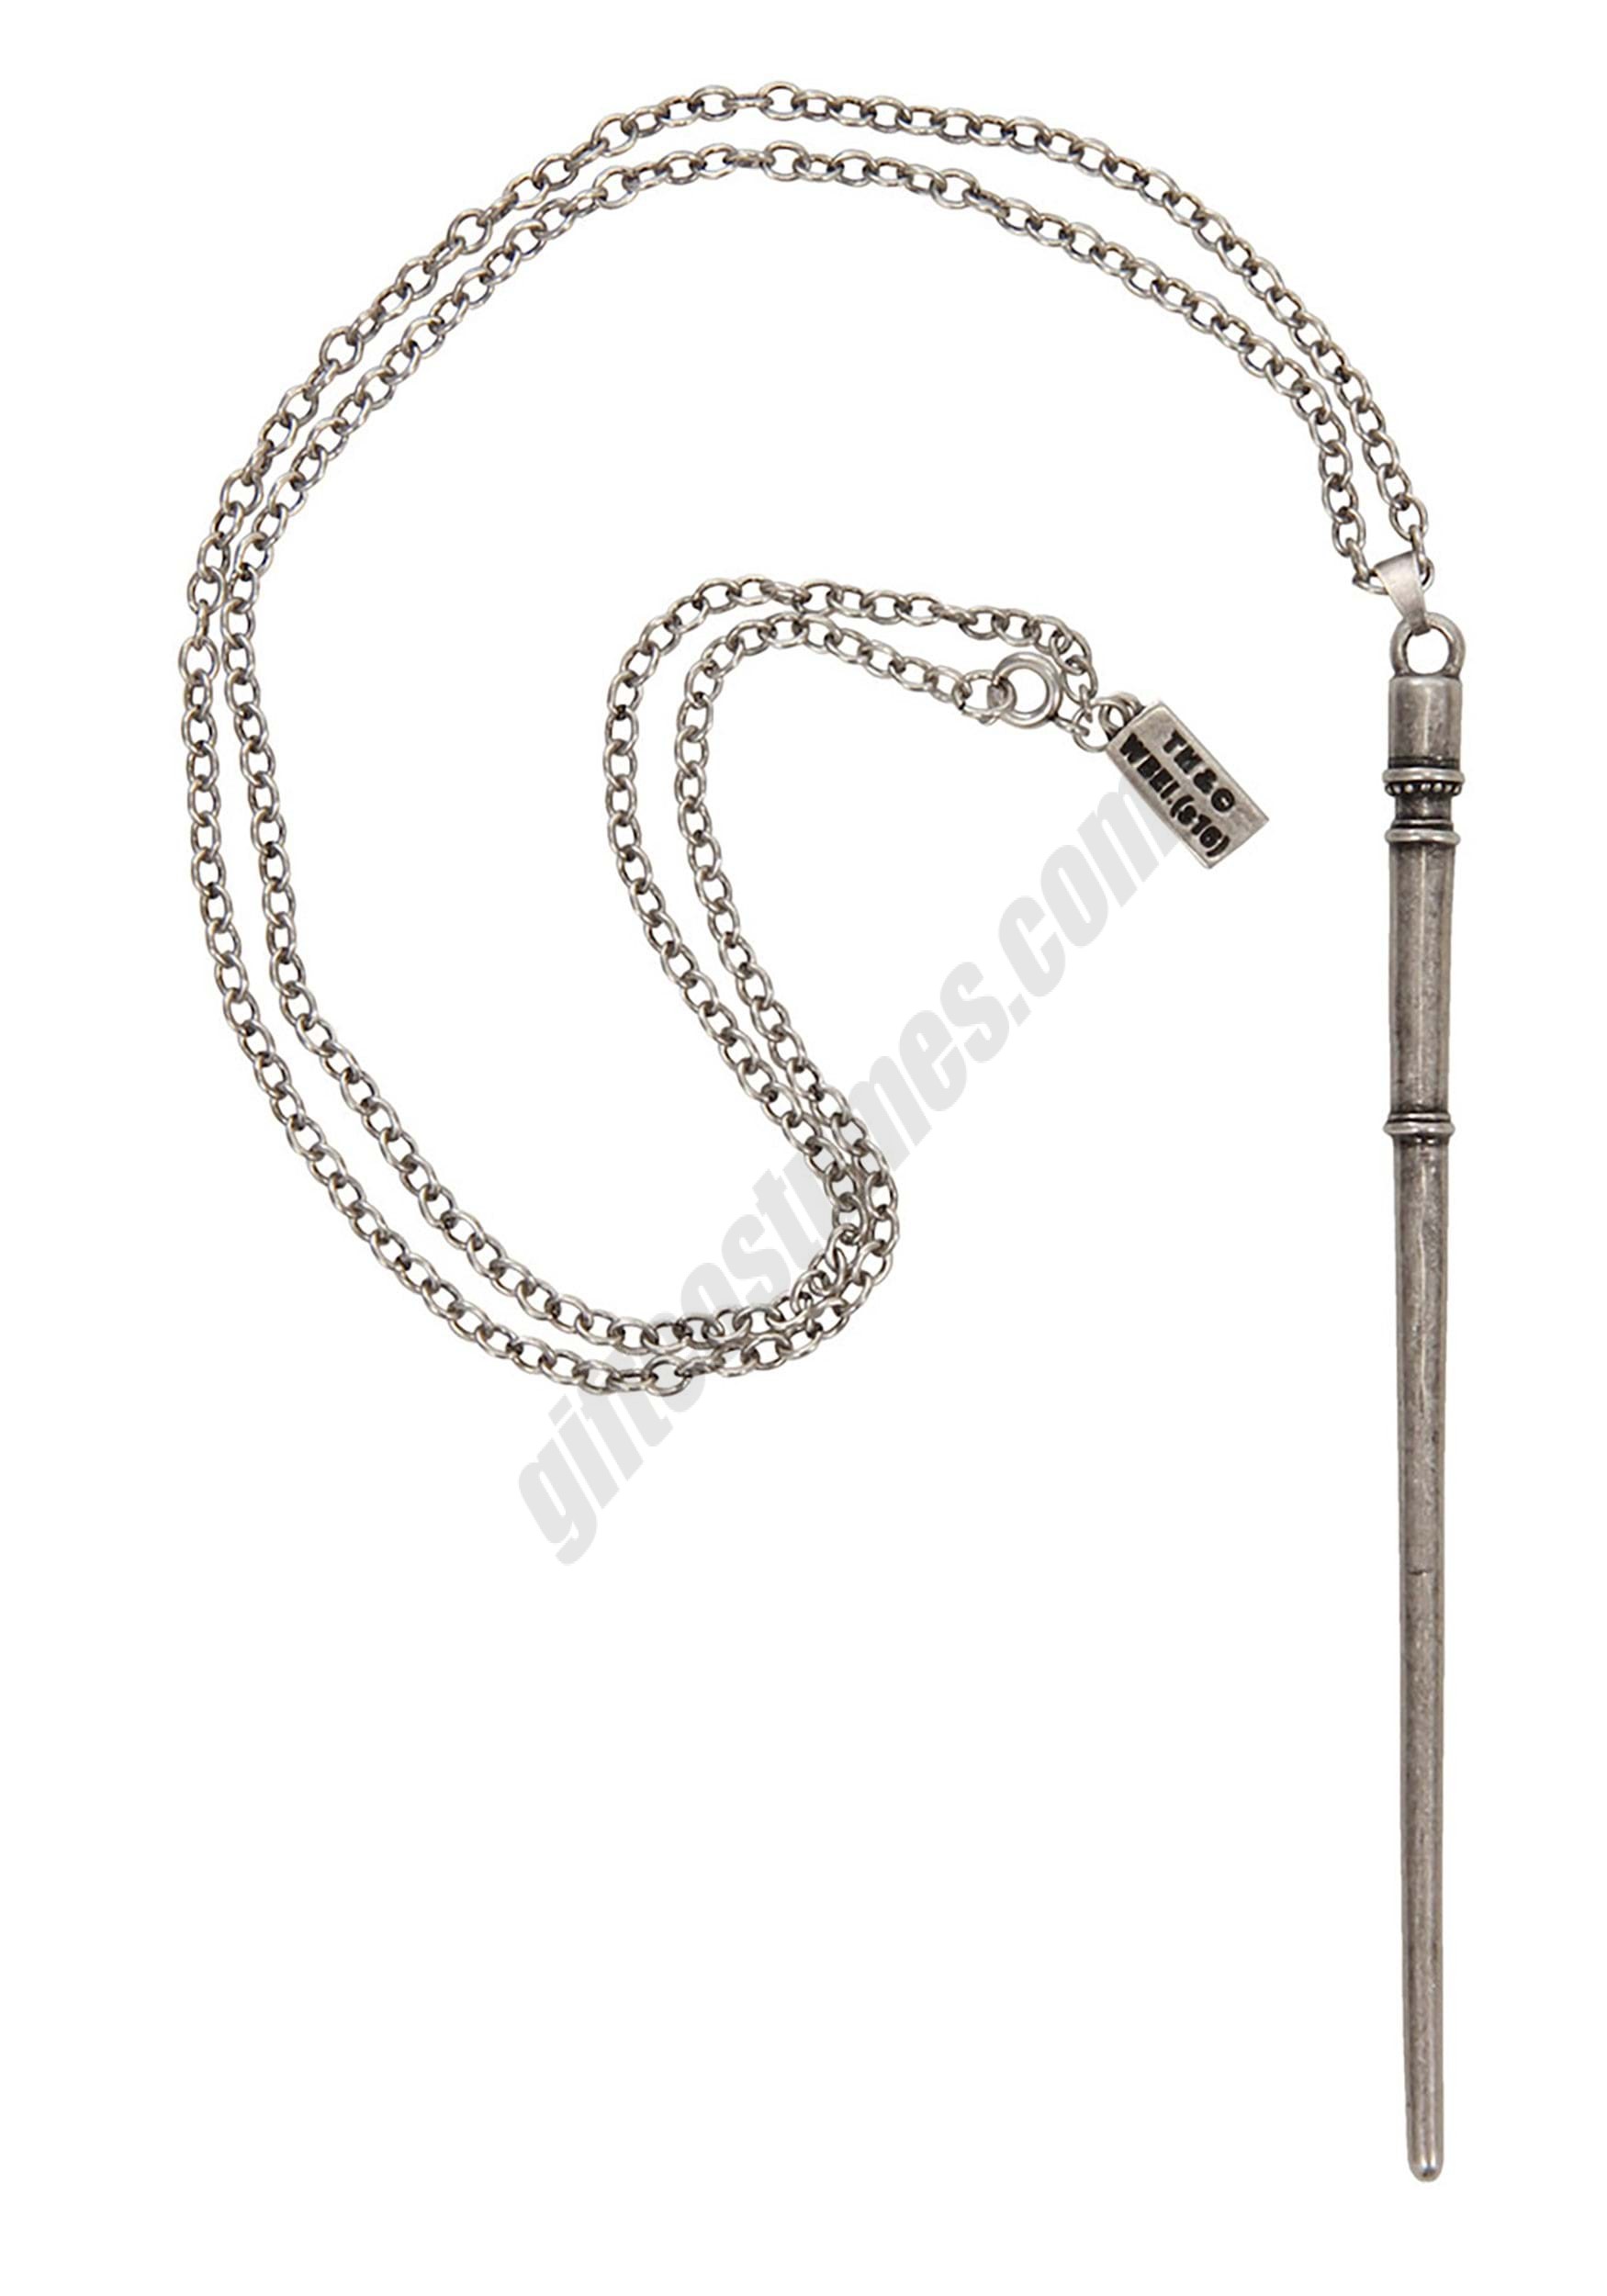 Fantastic Beast | Percival Graves Wand Necklace Promotions - Fantastic Beast | Percival Graves Wand Necklace Promotions